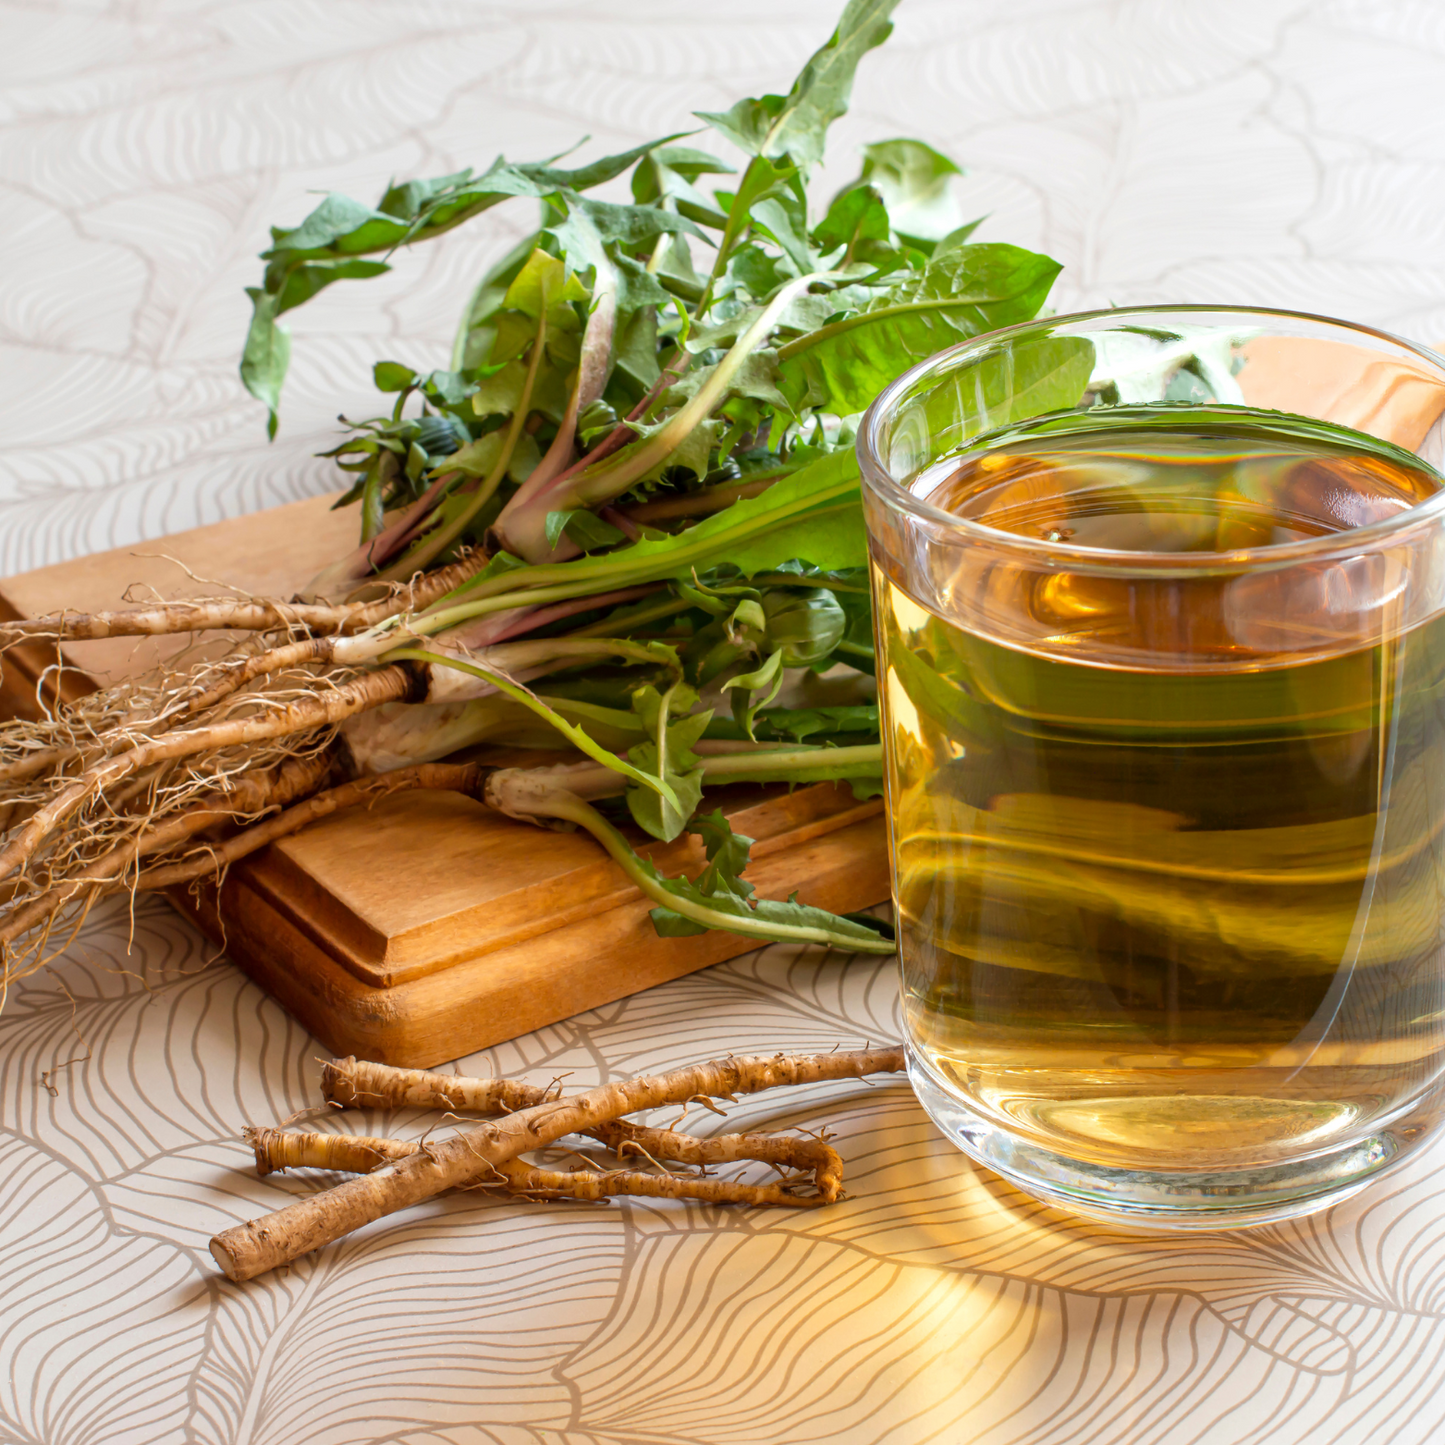 Dandelion Root Loose Leaf Herbal Tea for Purification Rituals and Healing Ceremonies.